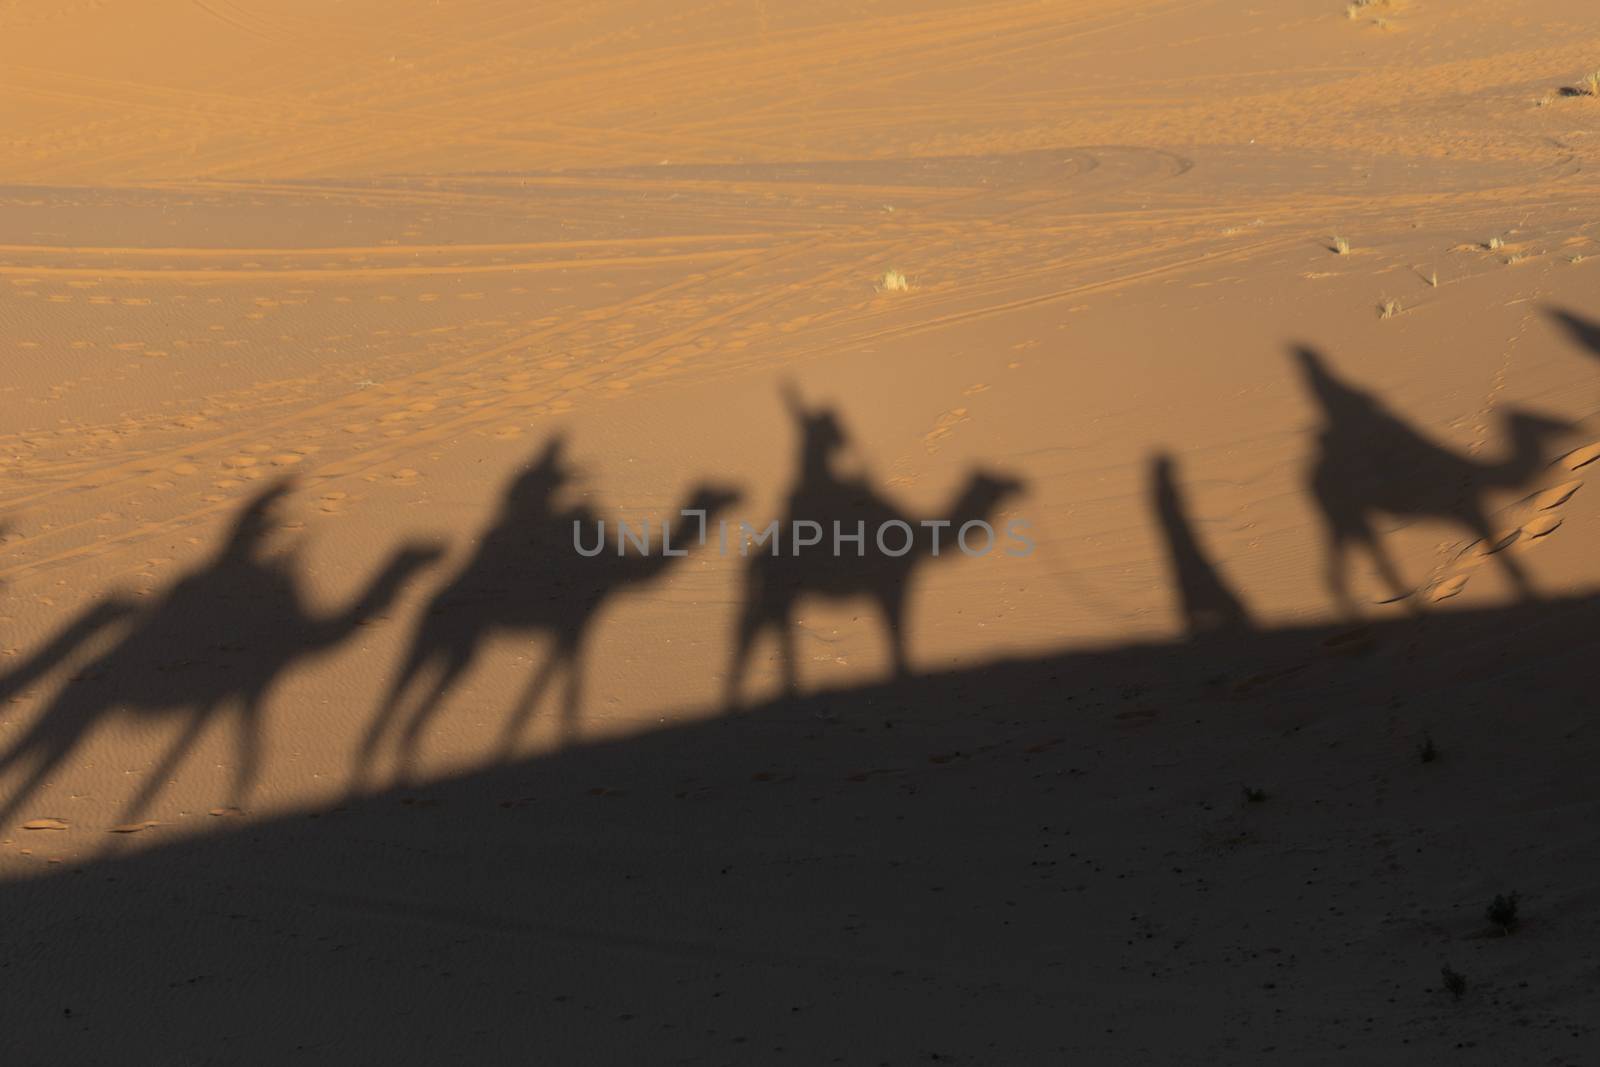 Shadows of camel riders in the late afternoon in the Saharan desert in Morocco by kgboxford